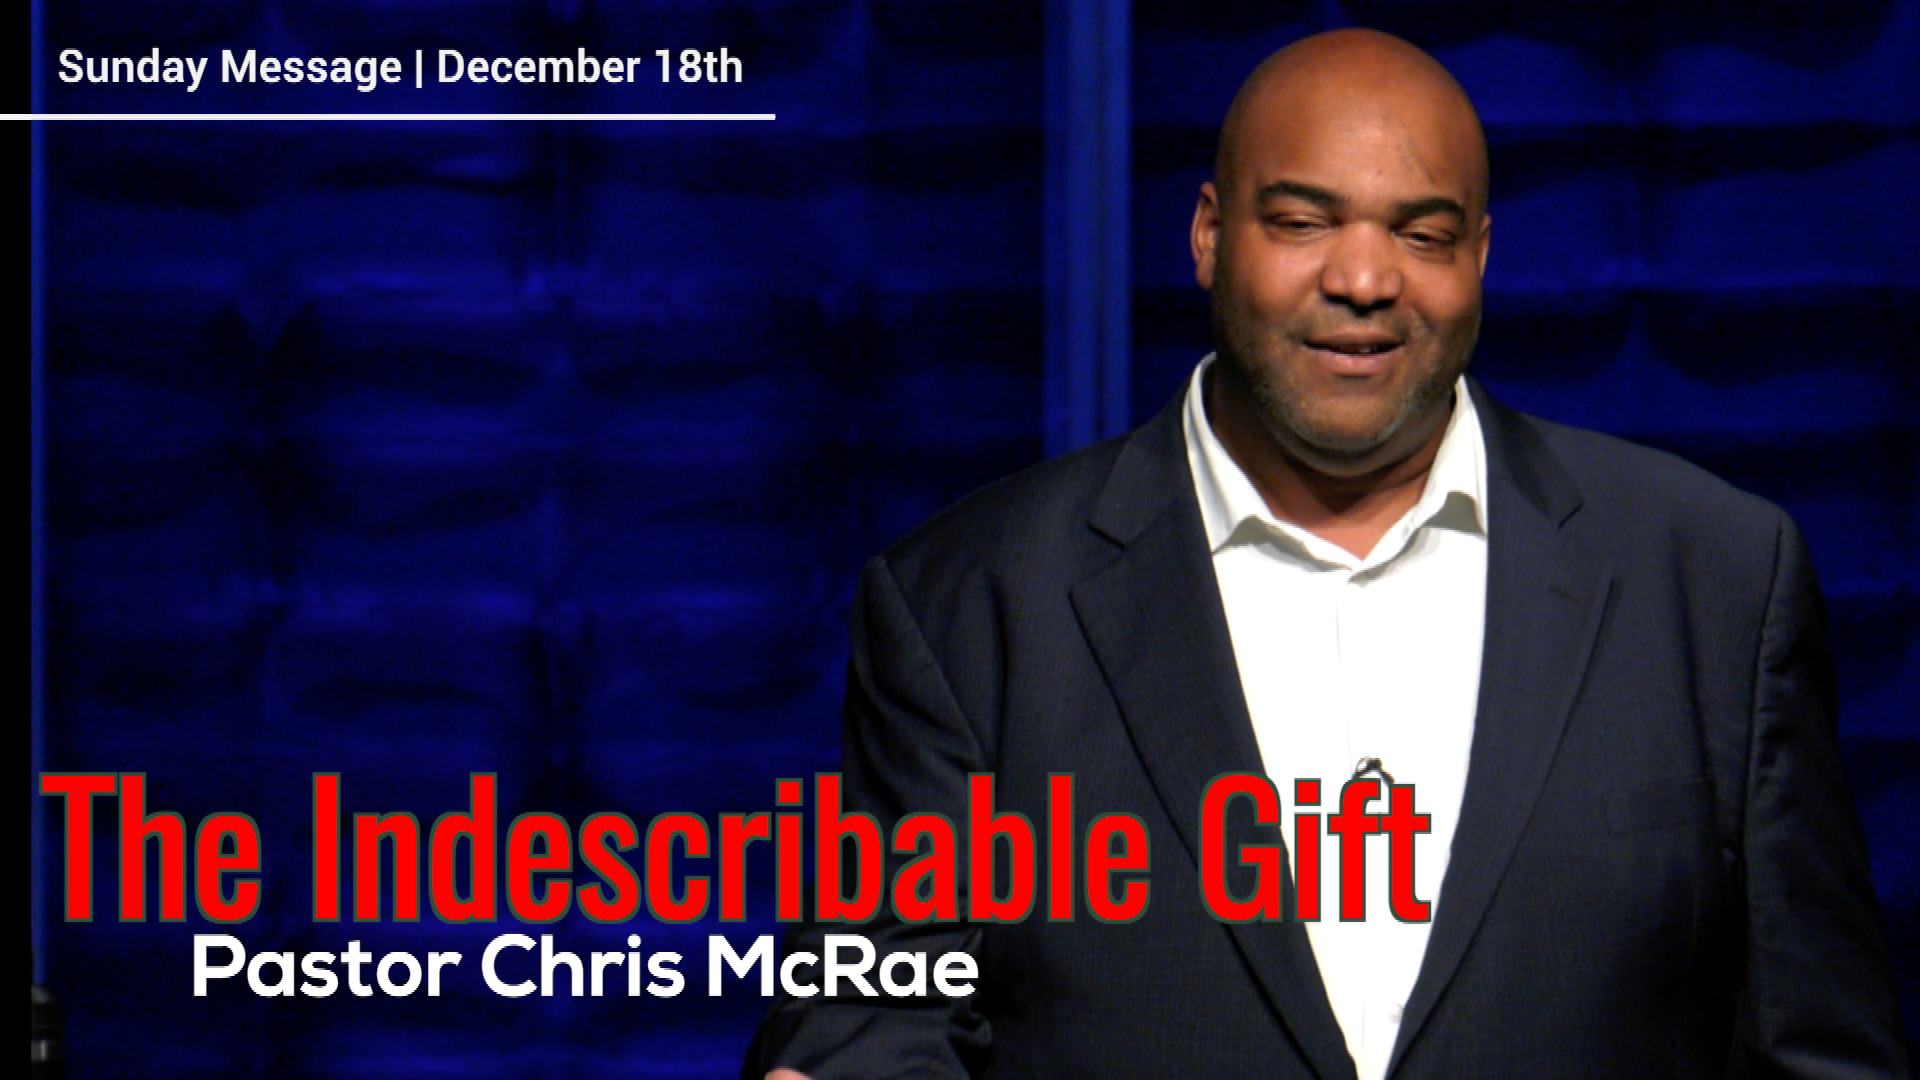 The The Indescribable Gift